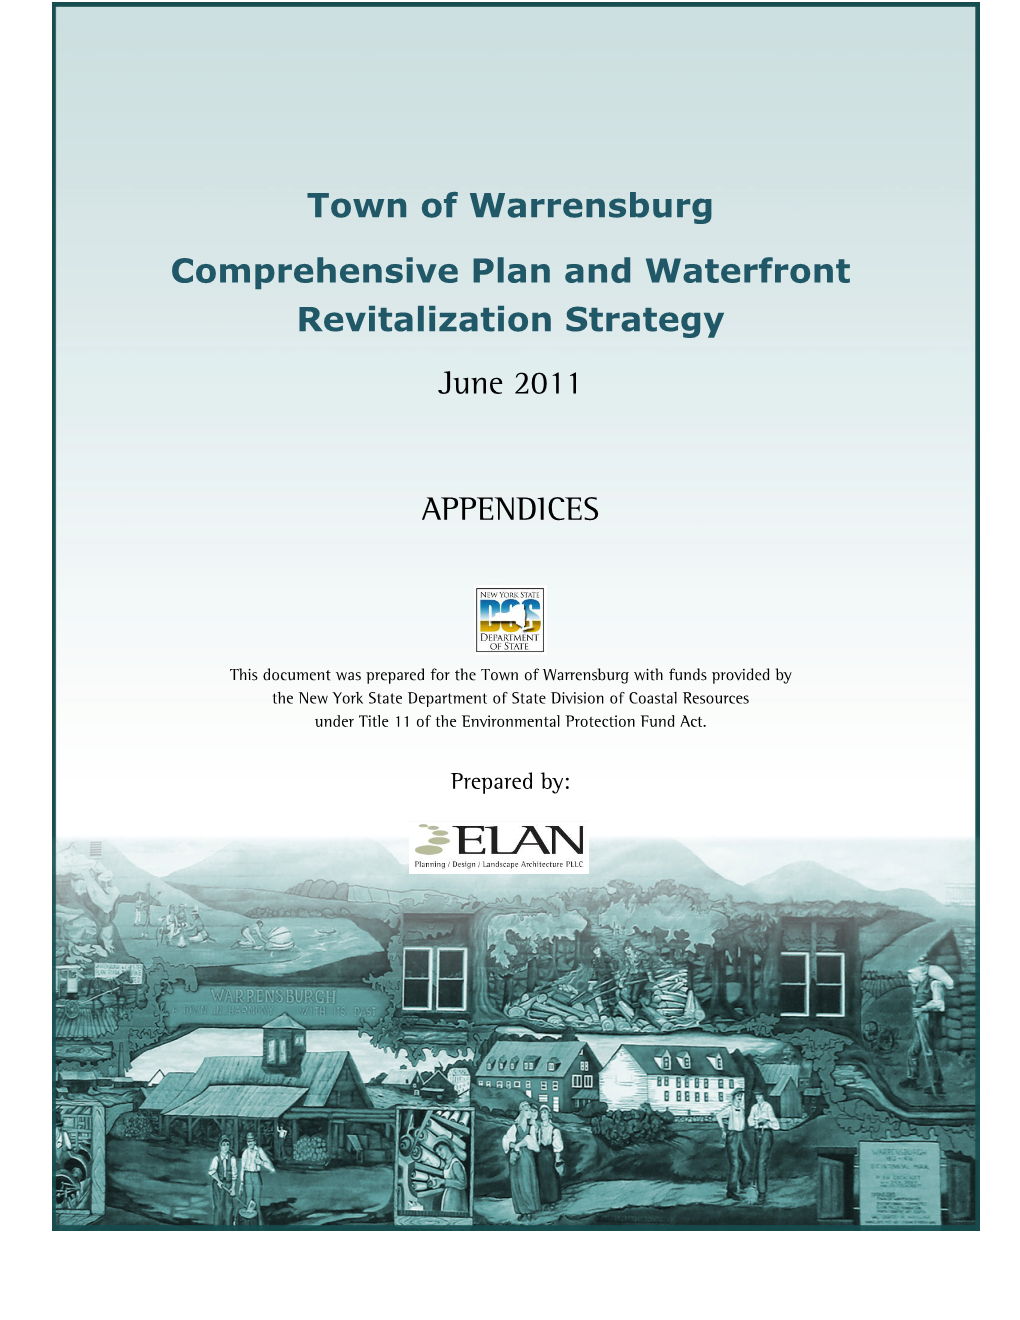 Town of Warrensburg Comprehensive Plan and Waterfront Revitalization Strategy June 2011